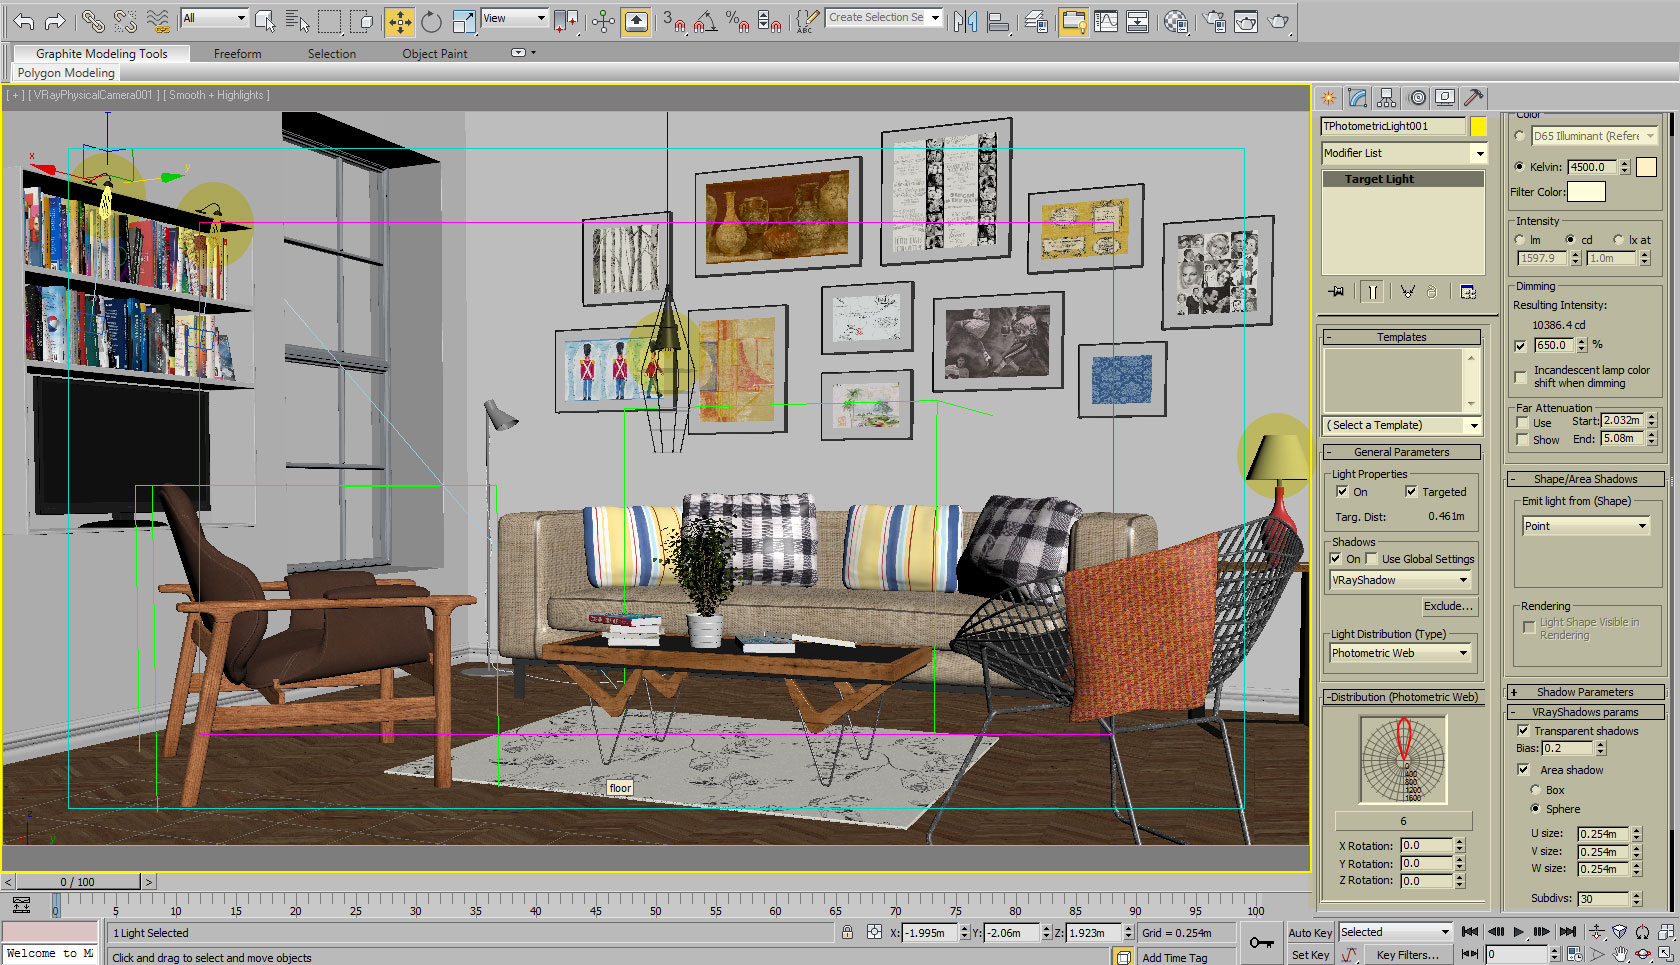 vray for 3ds max 2009